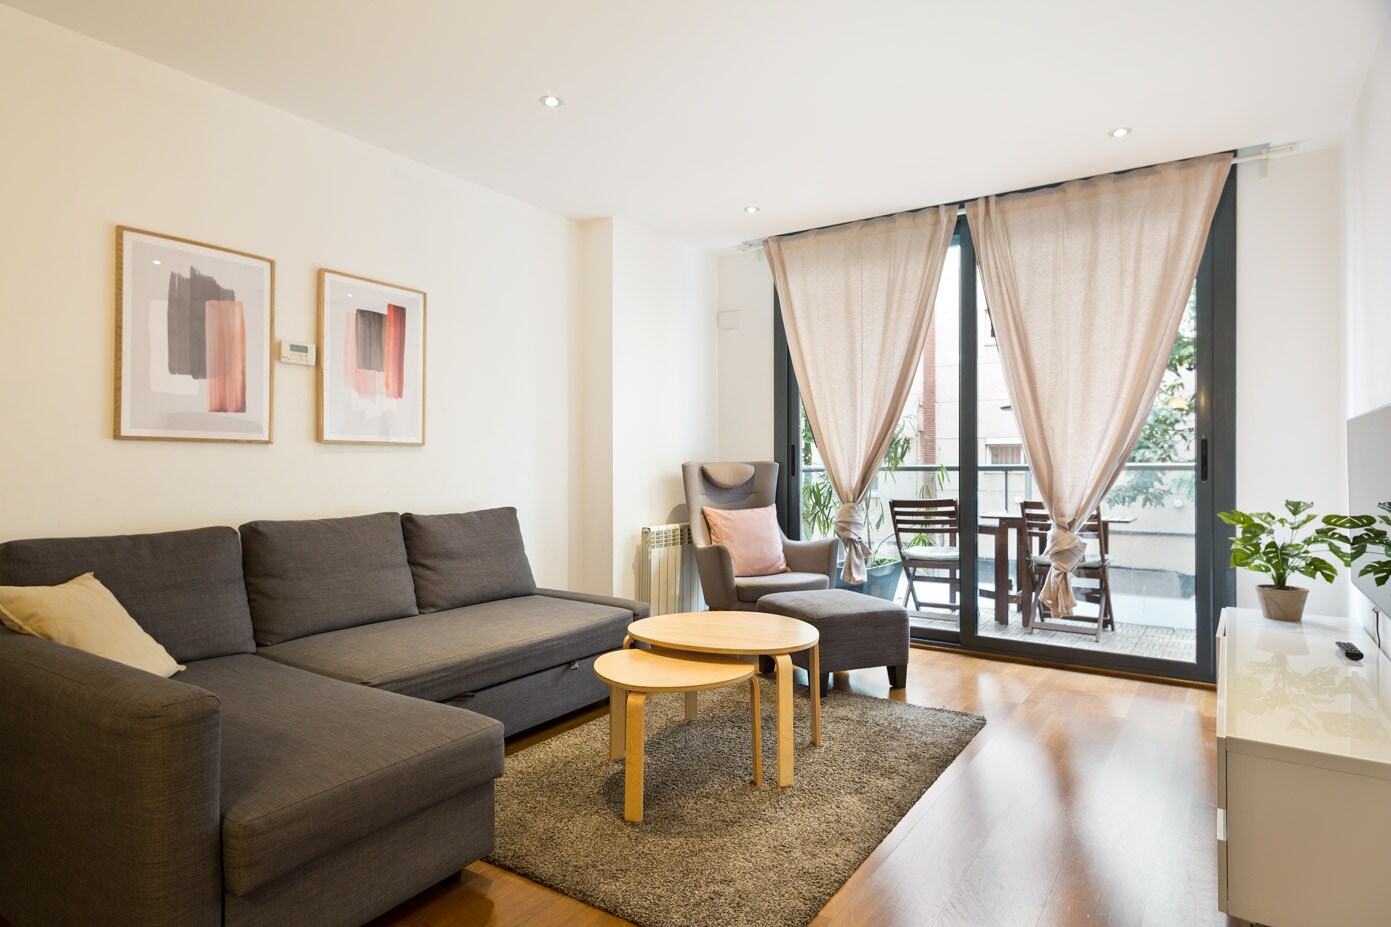 Property Image 2 - Affluent Plush Apartment with City Views from Balcony